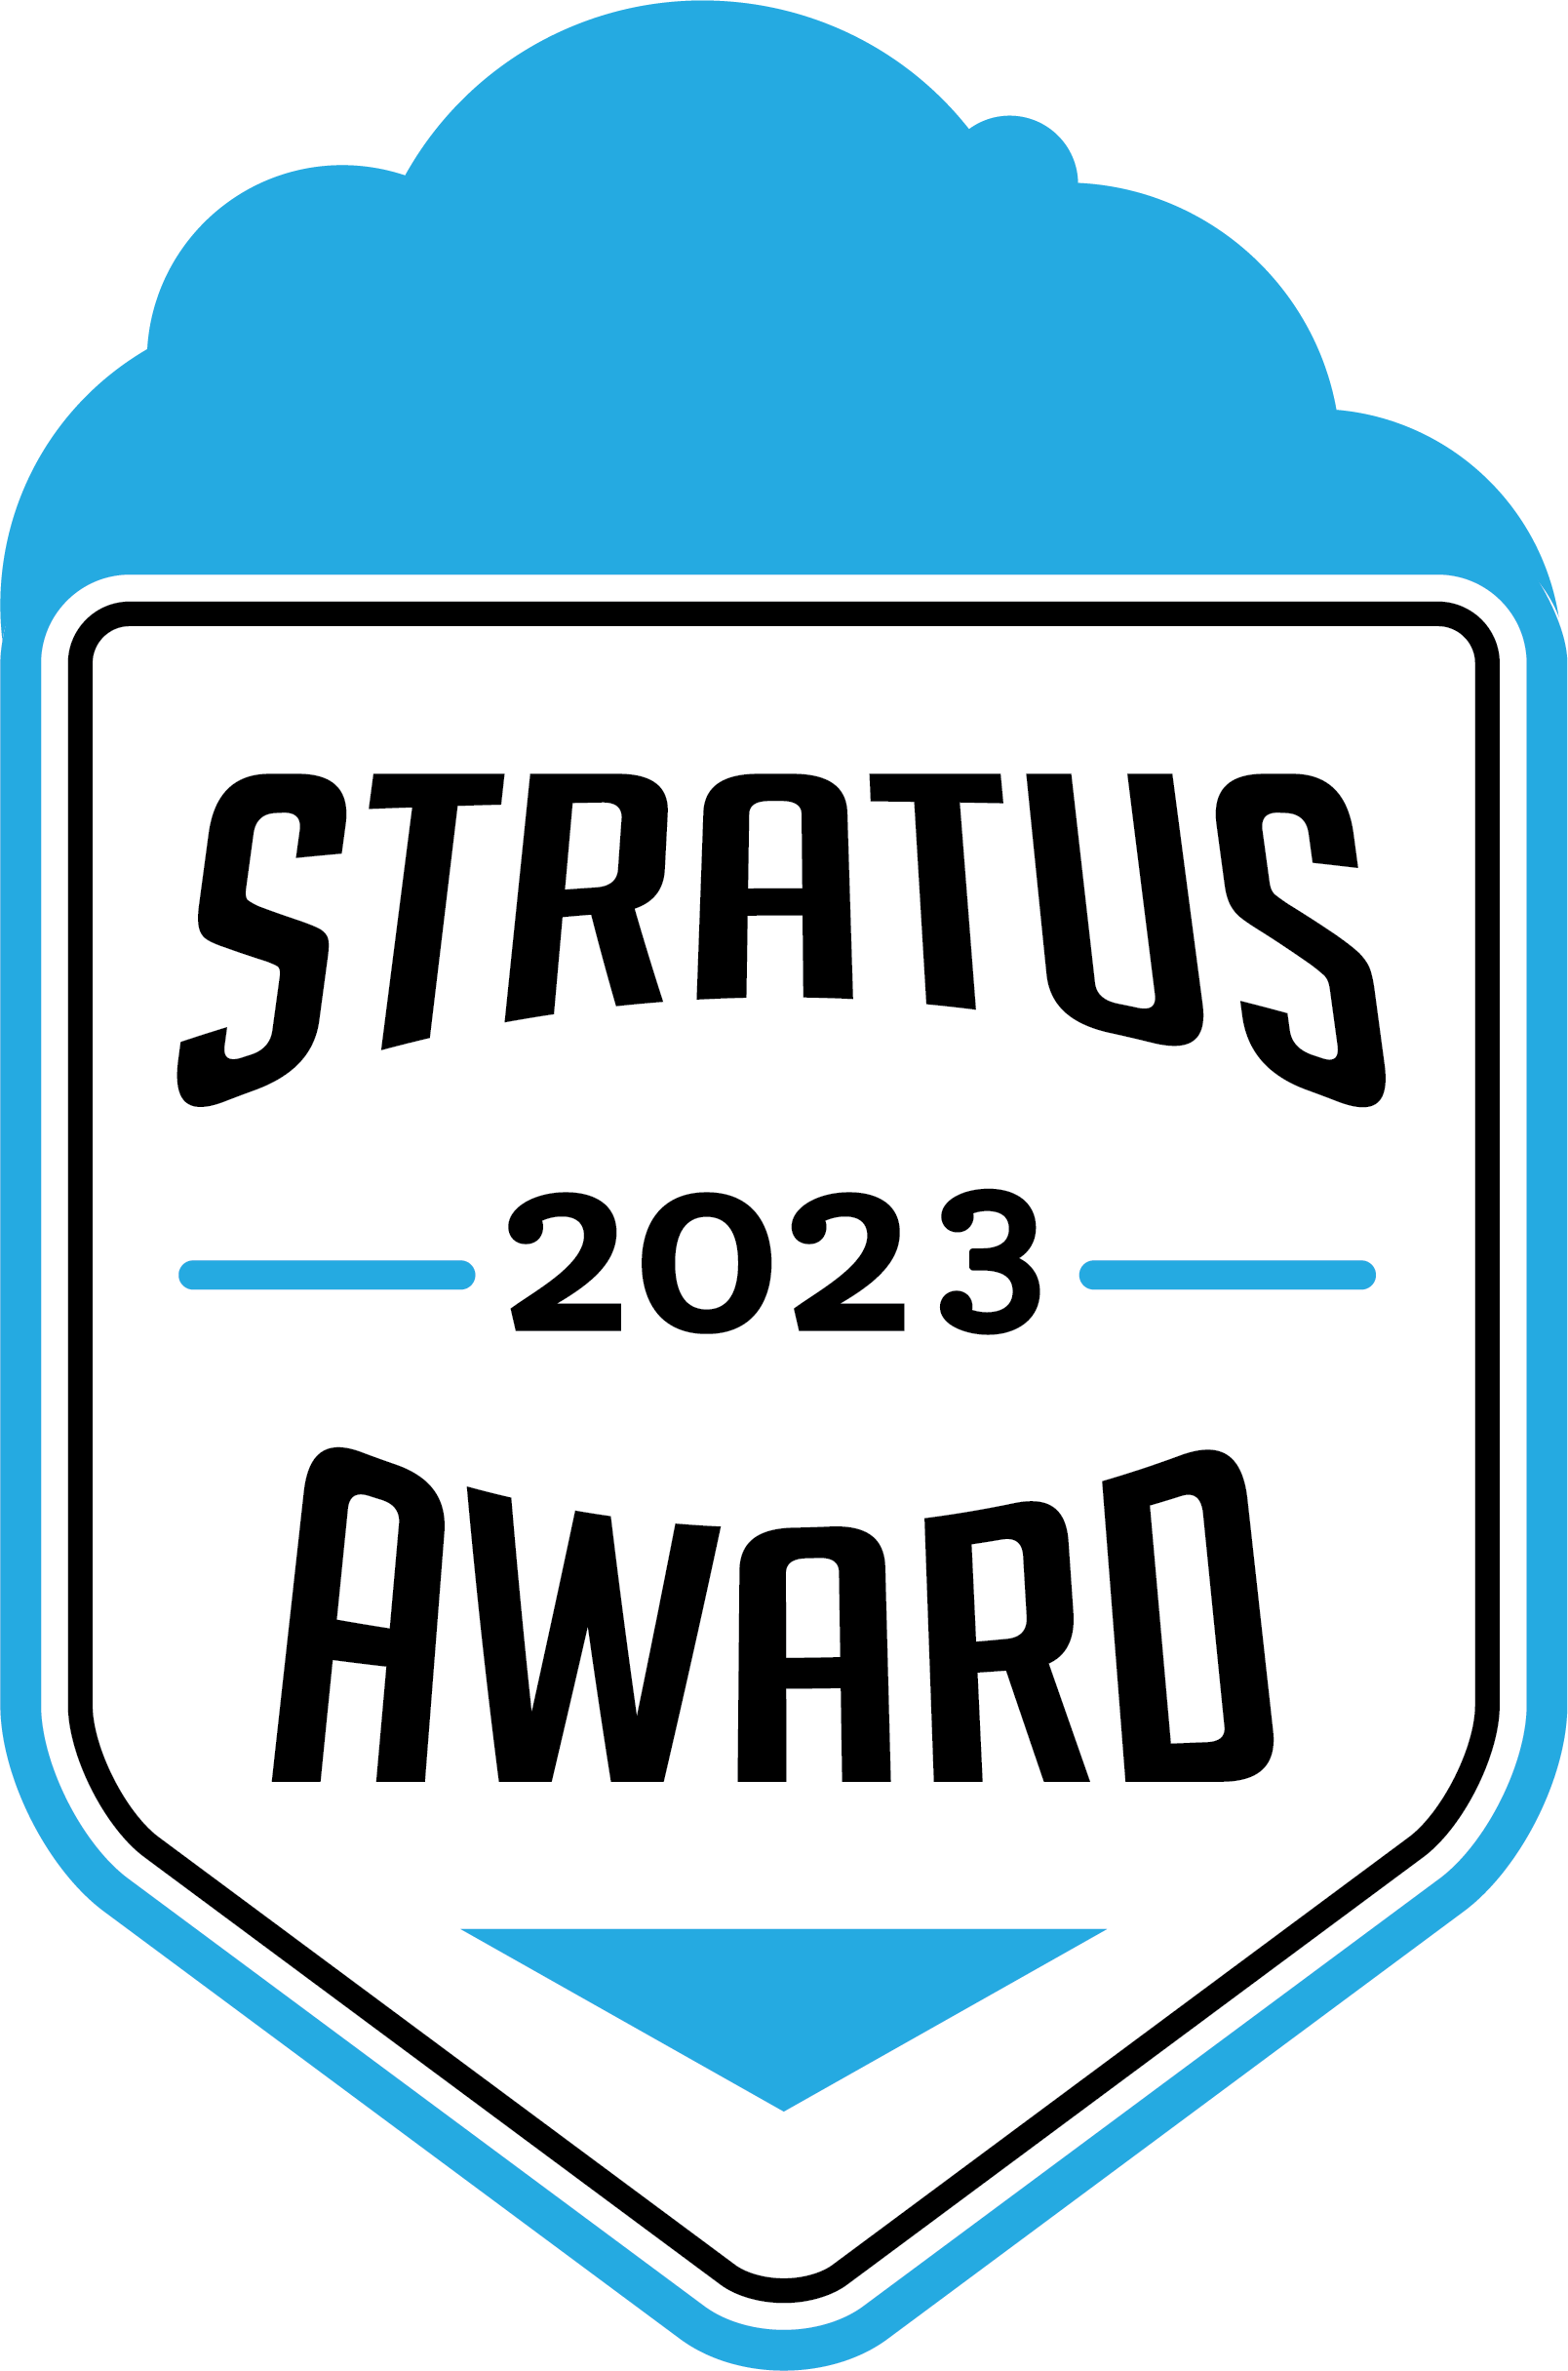 Stratus Award 2023 - Managed Cloud Security Service - Business Intelligence Group